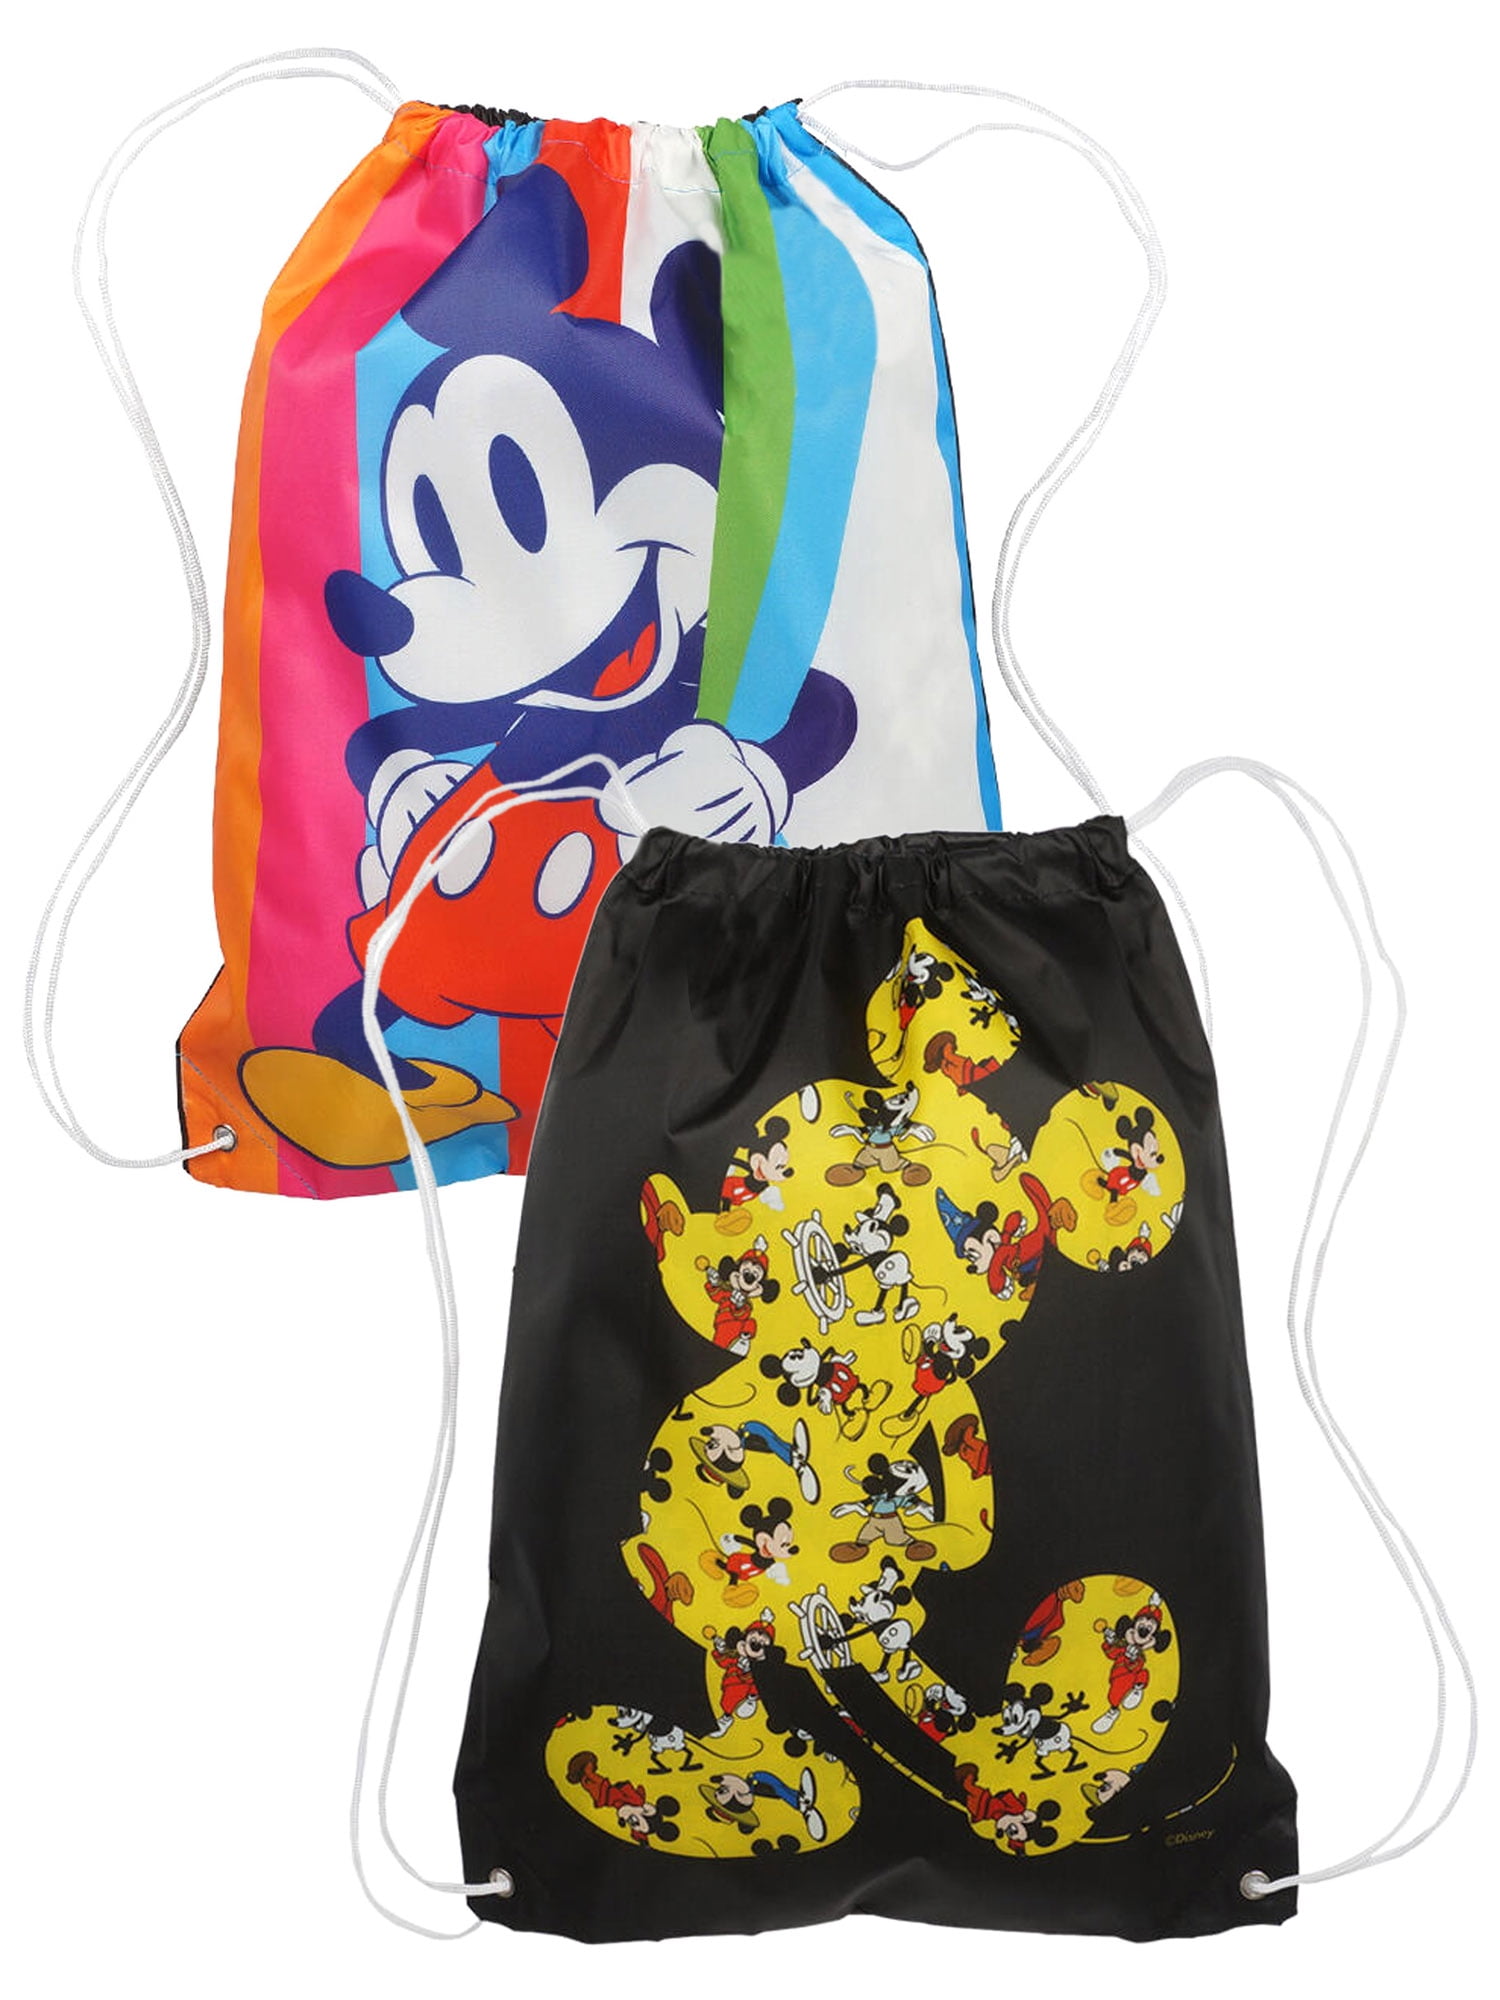 Disney Mickey Mouse & Friends Drawstring Backpack School Sport Gym Bag for Kids